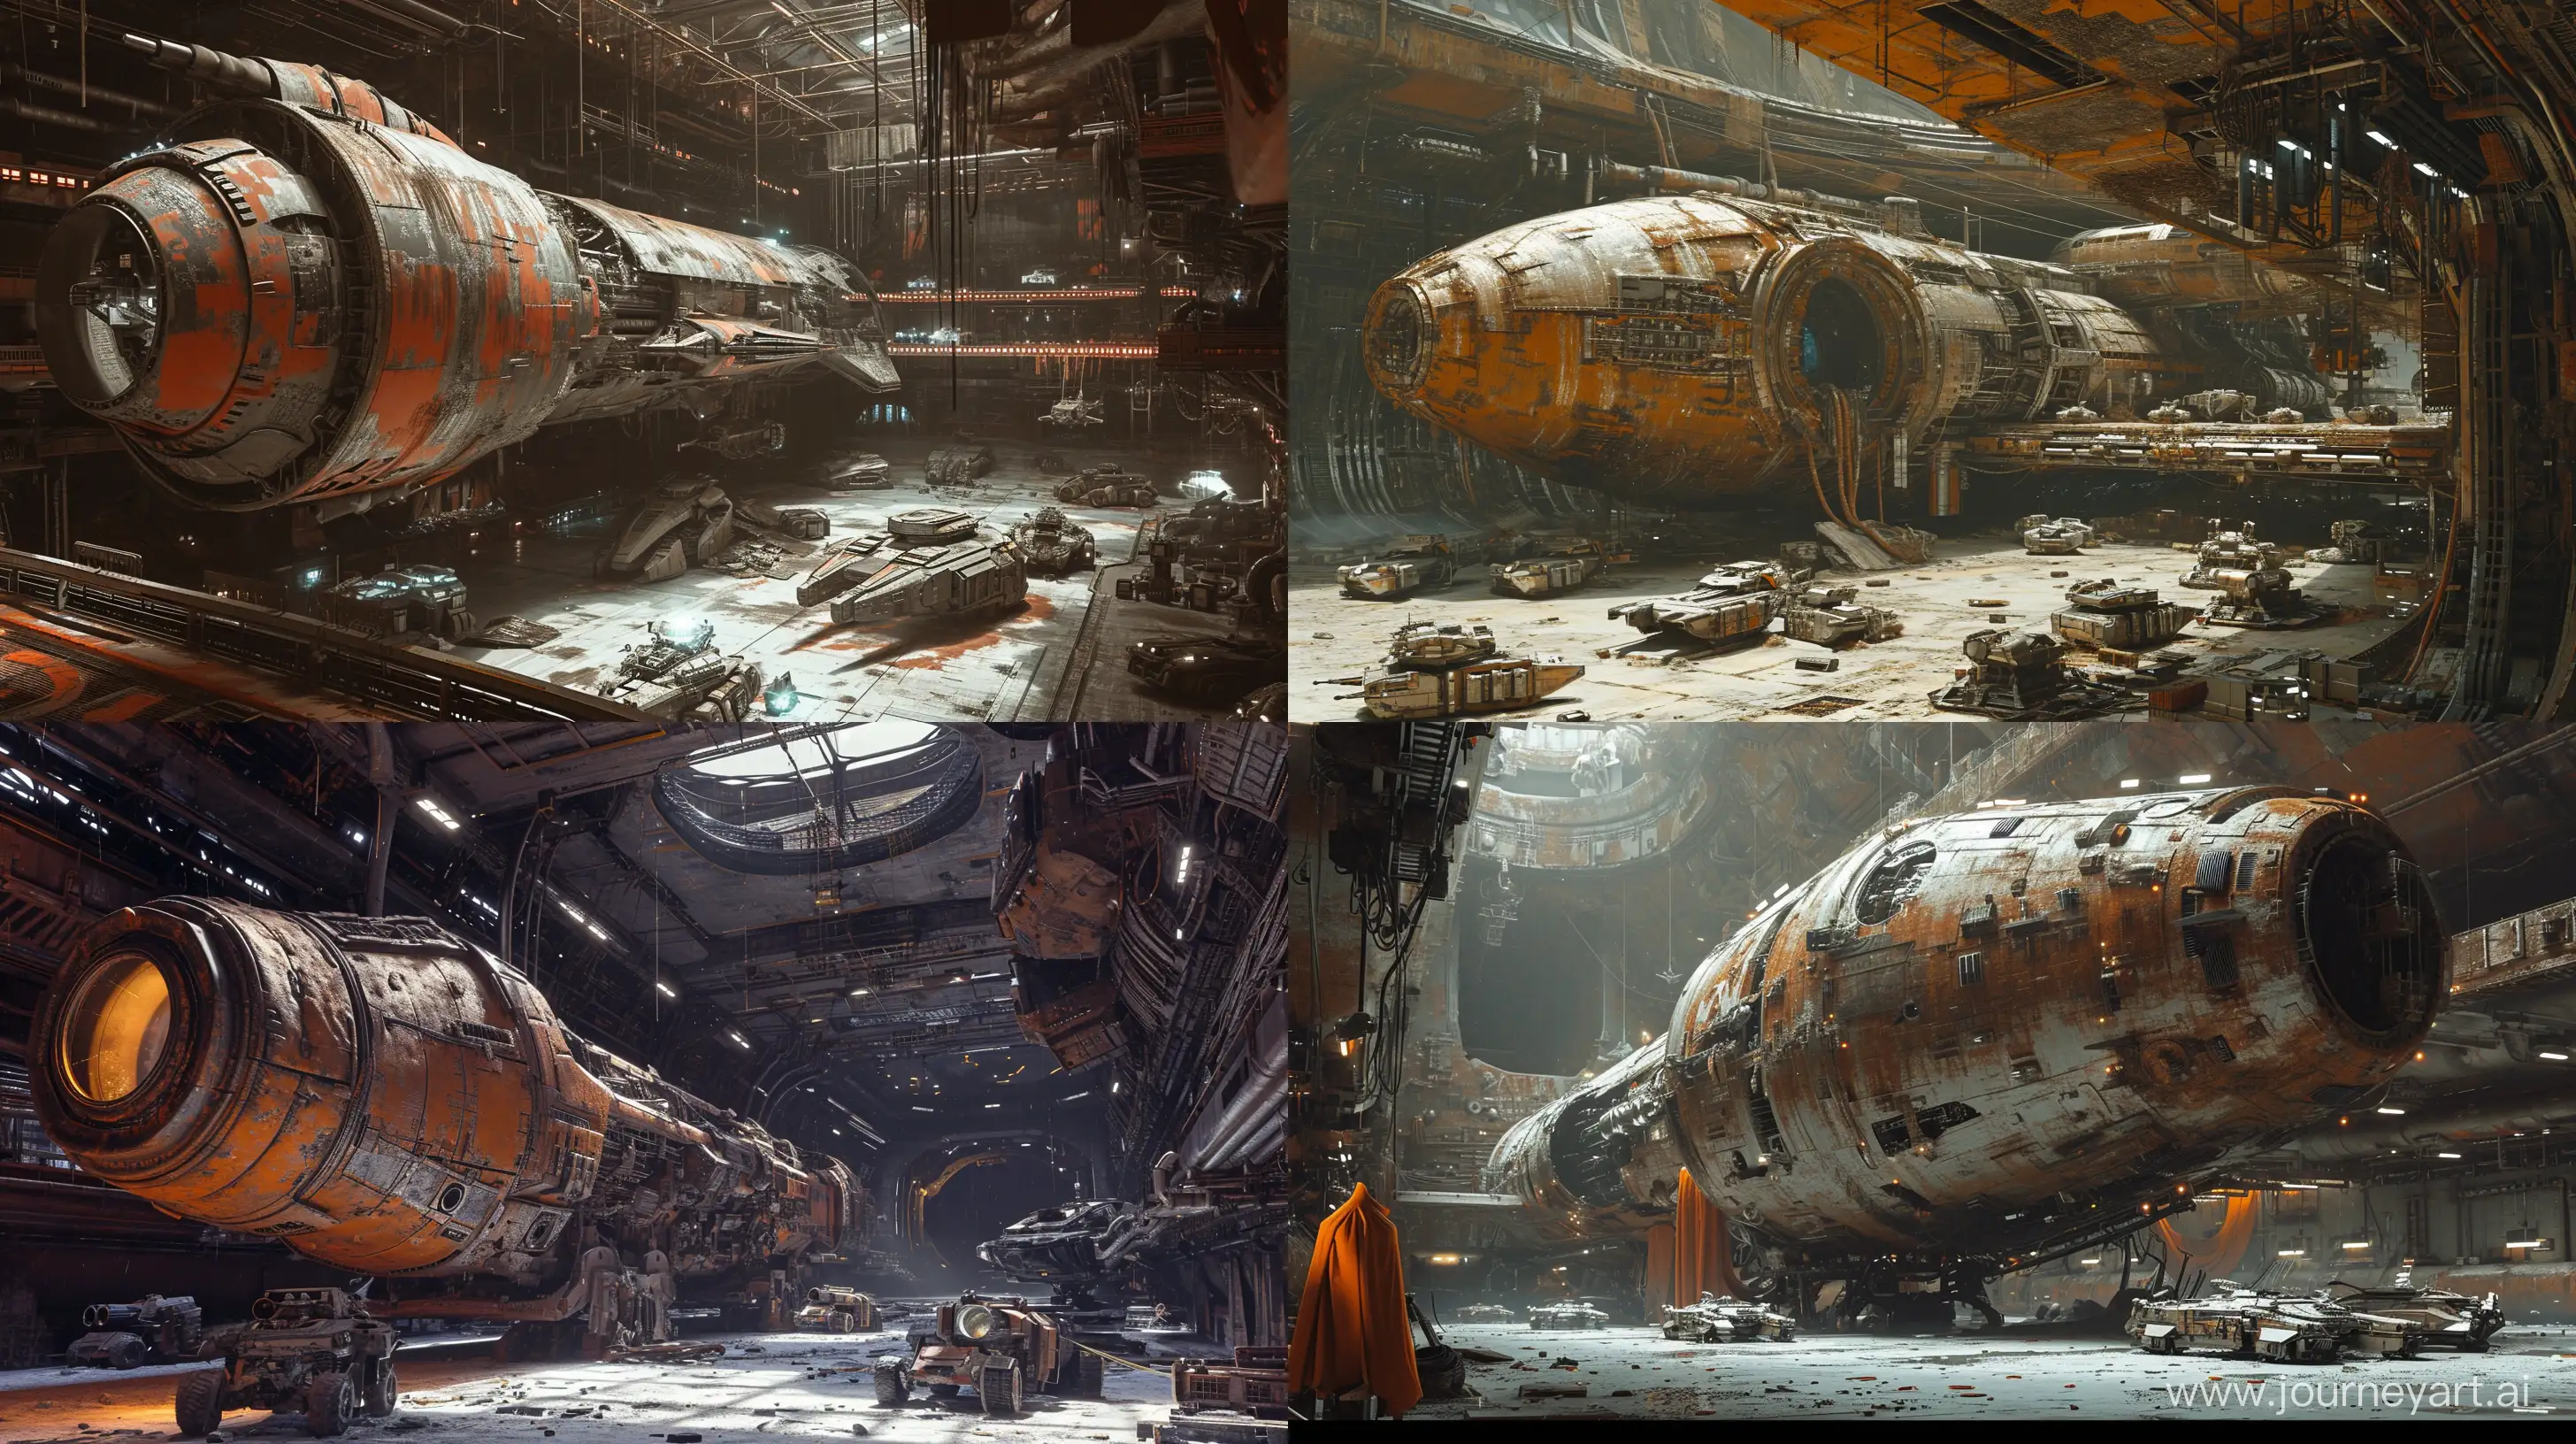 Abandoned-Alien-Spaceship-Interior-with-Combat-Vehicles-and-Crashed-Wrecks